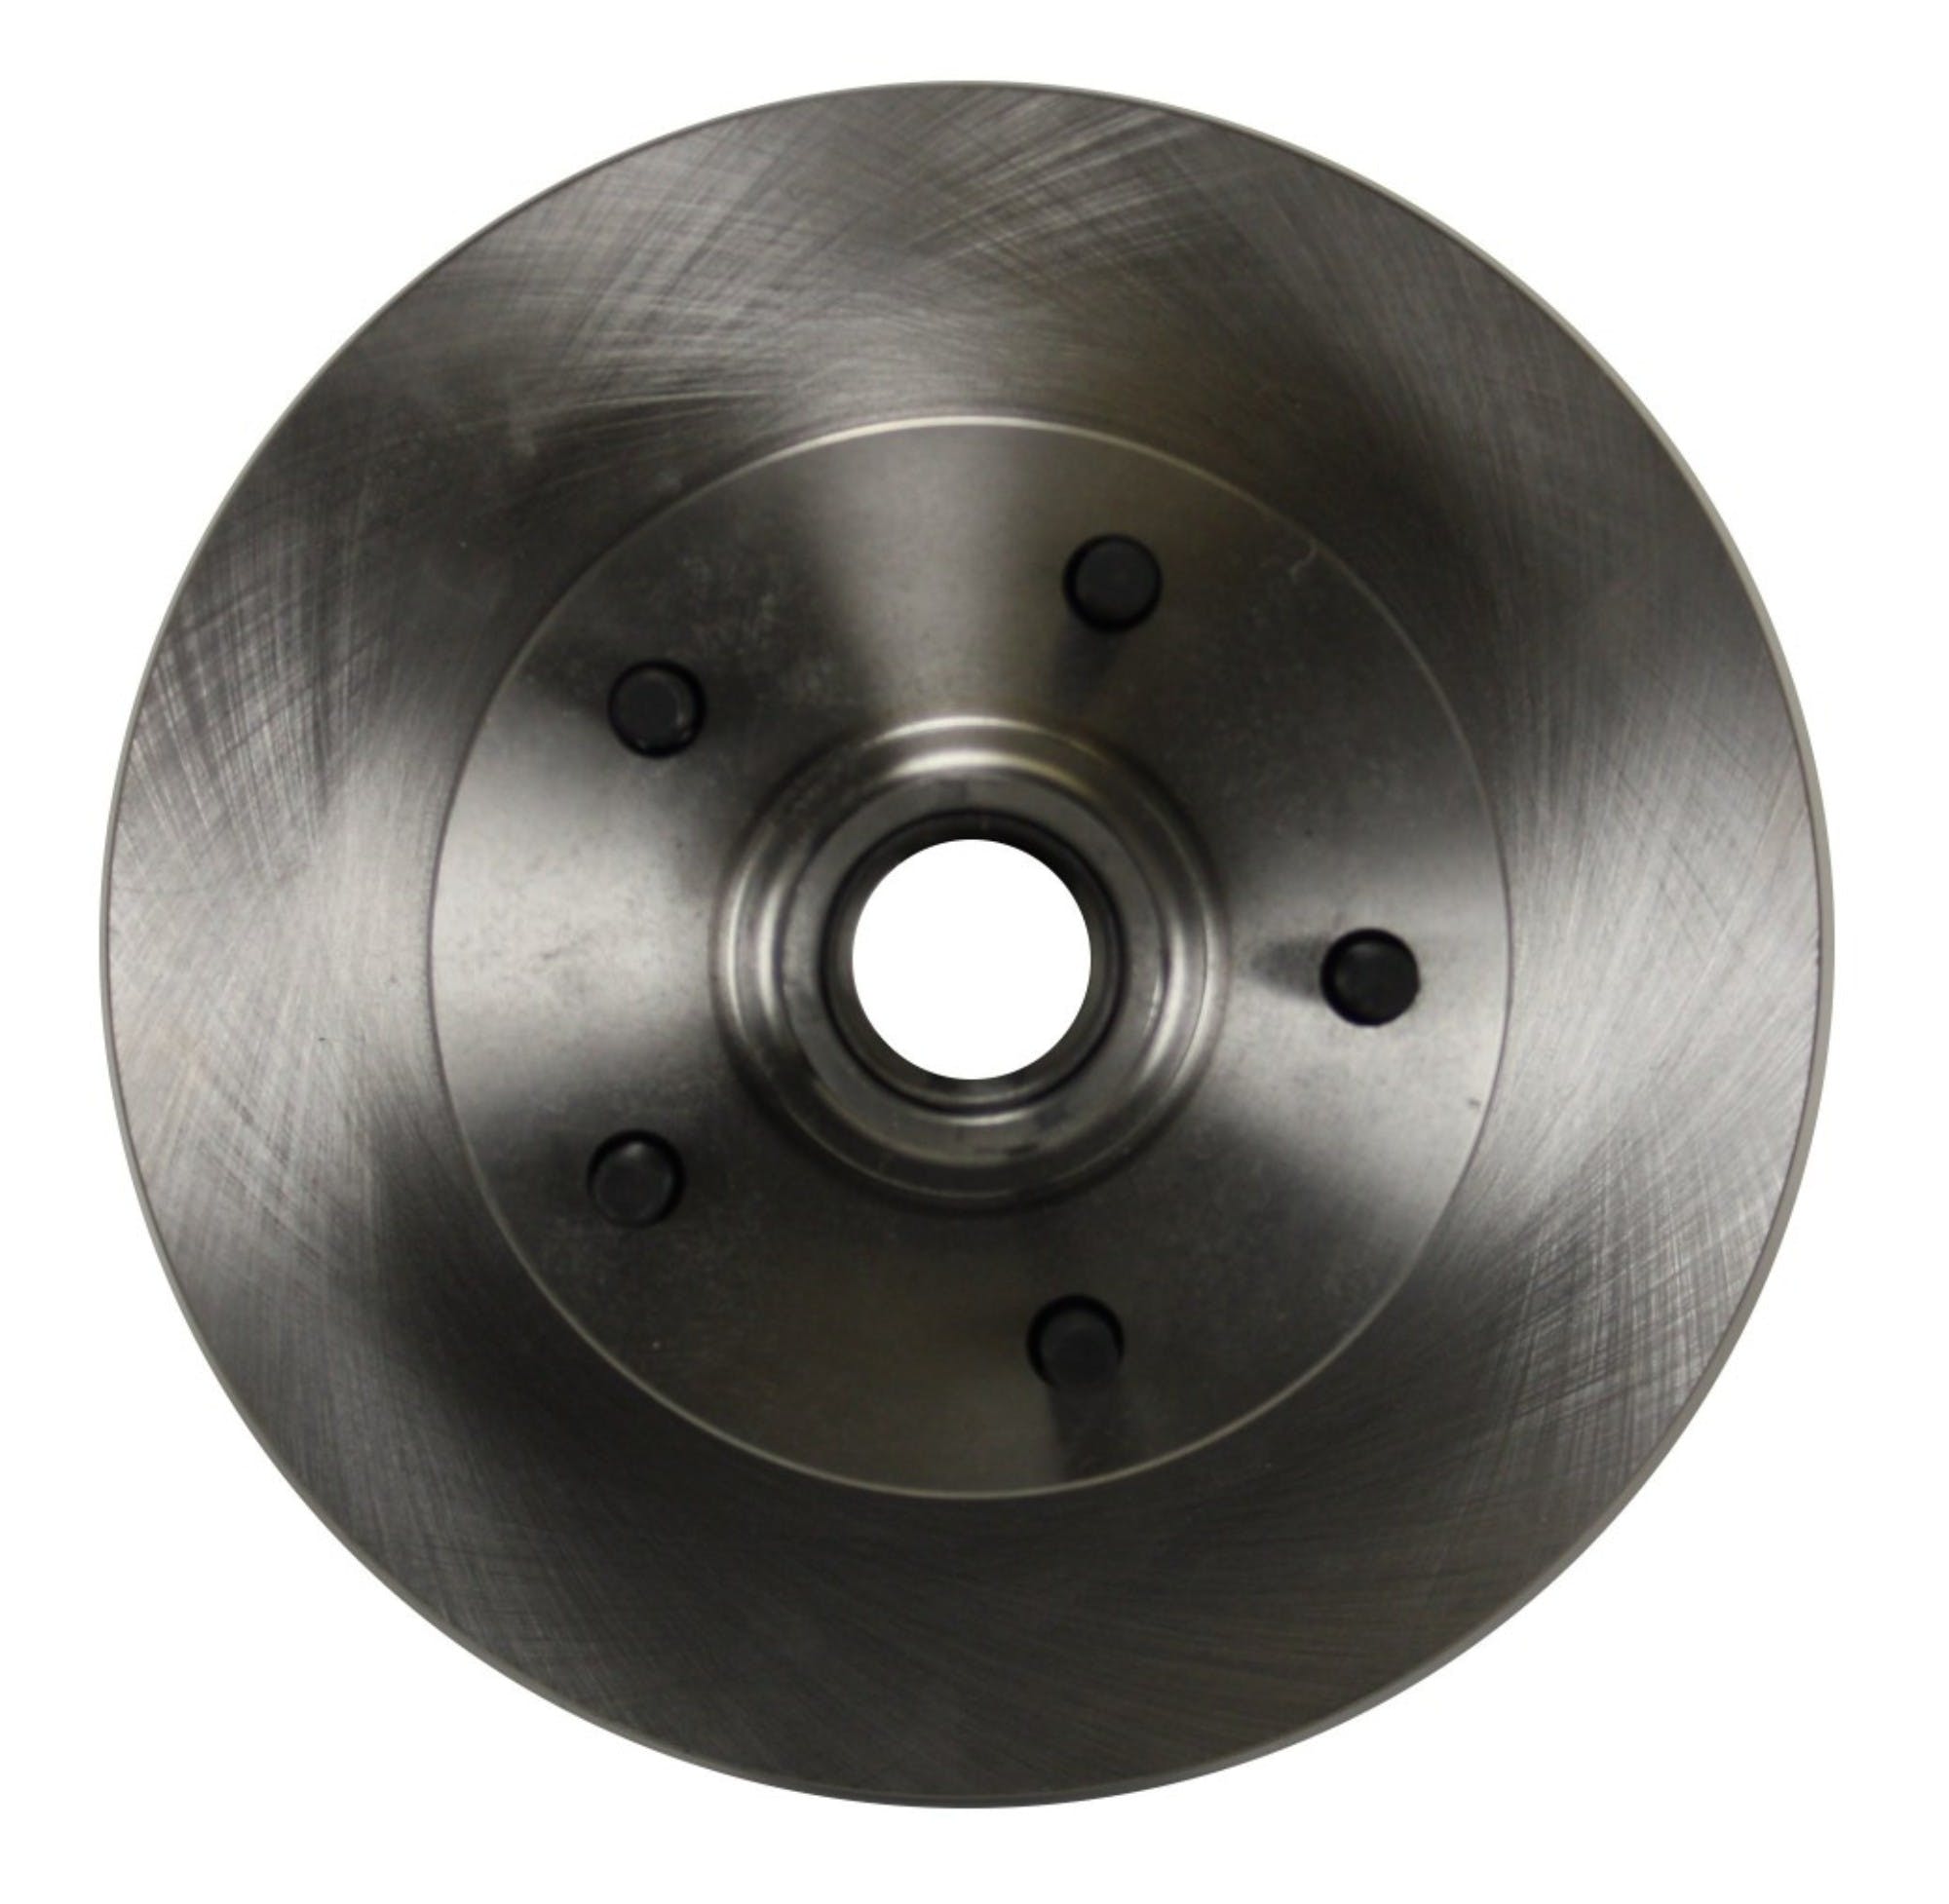 LEED Brakes FC1003-M1A3 Power Front Disc Kit - 8 in - Disc Disc - Zinc